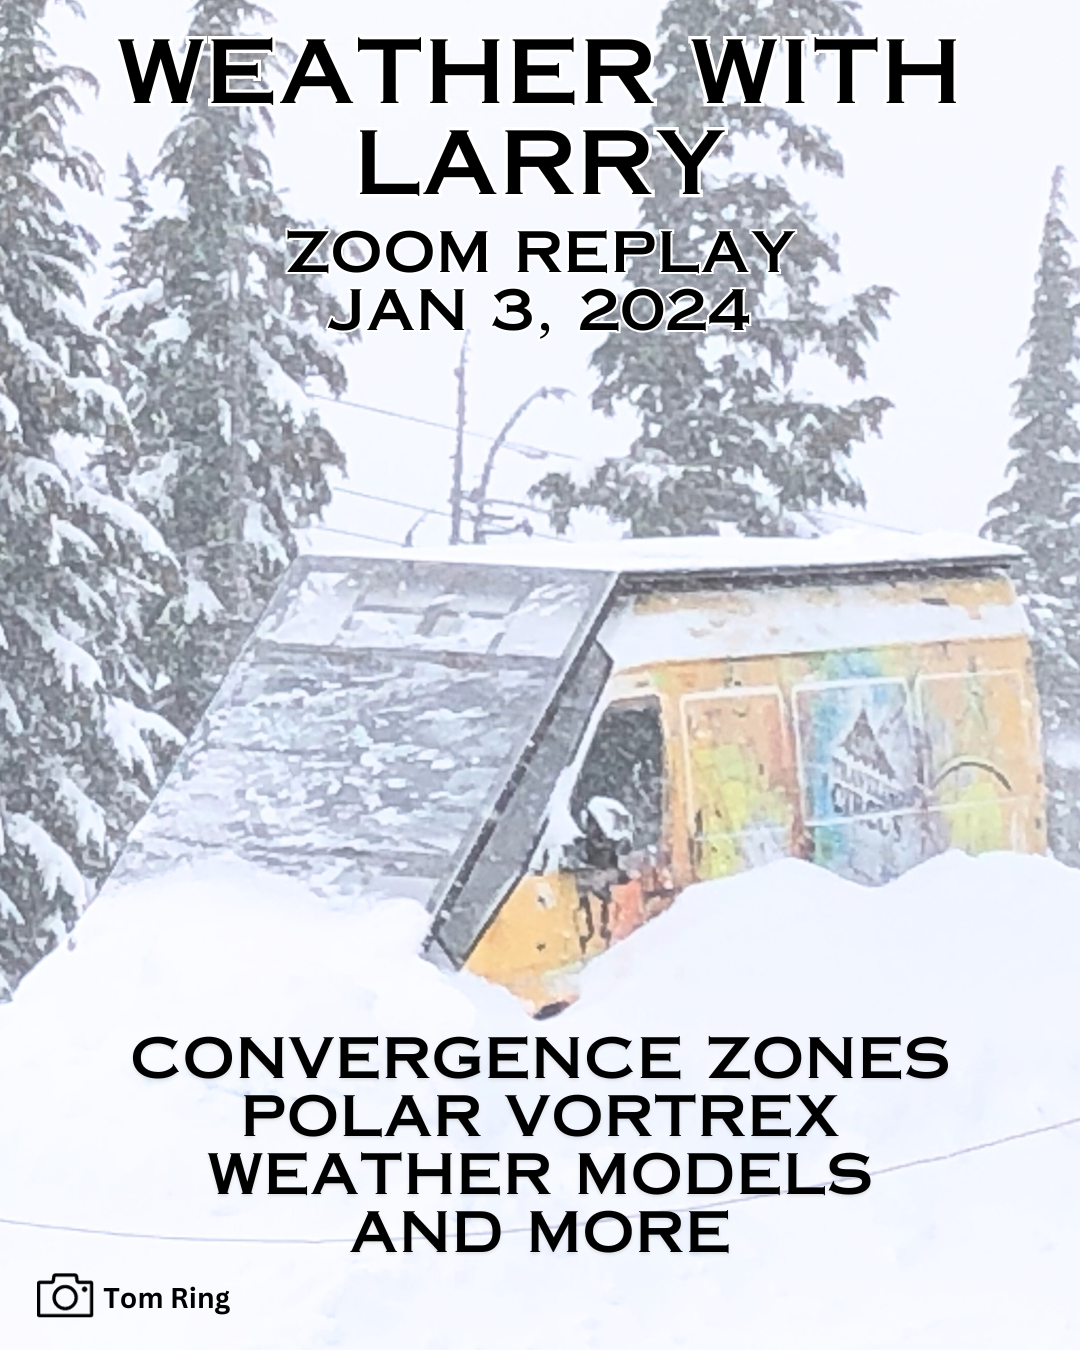 Weather with Larry. Polar Vortex, Convergence Zones and Weather Models.